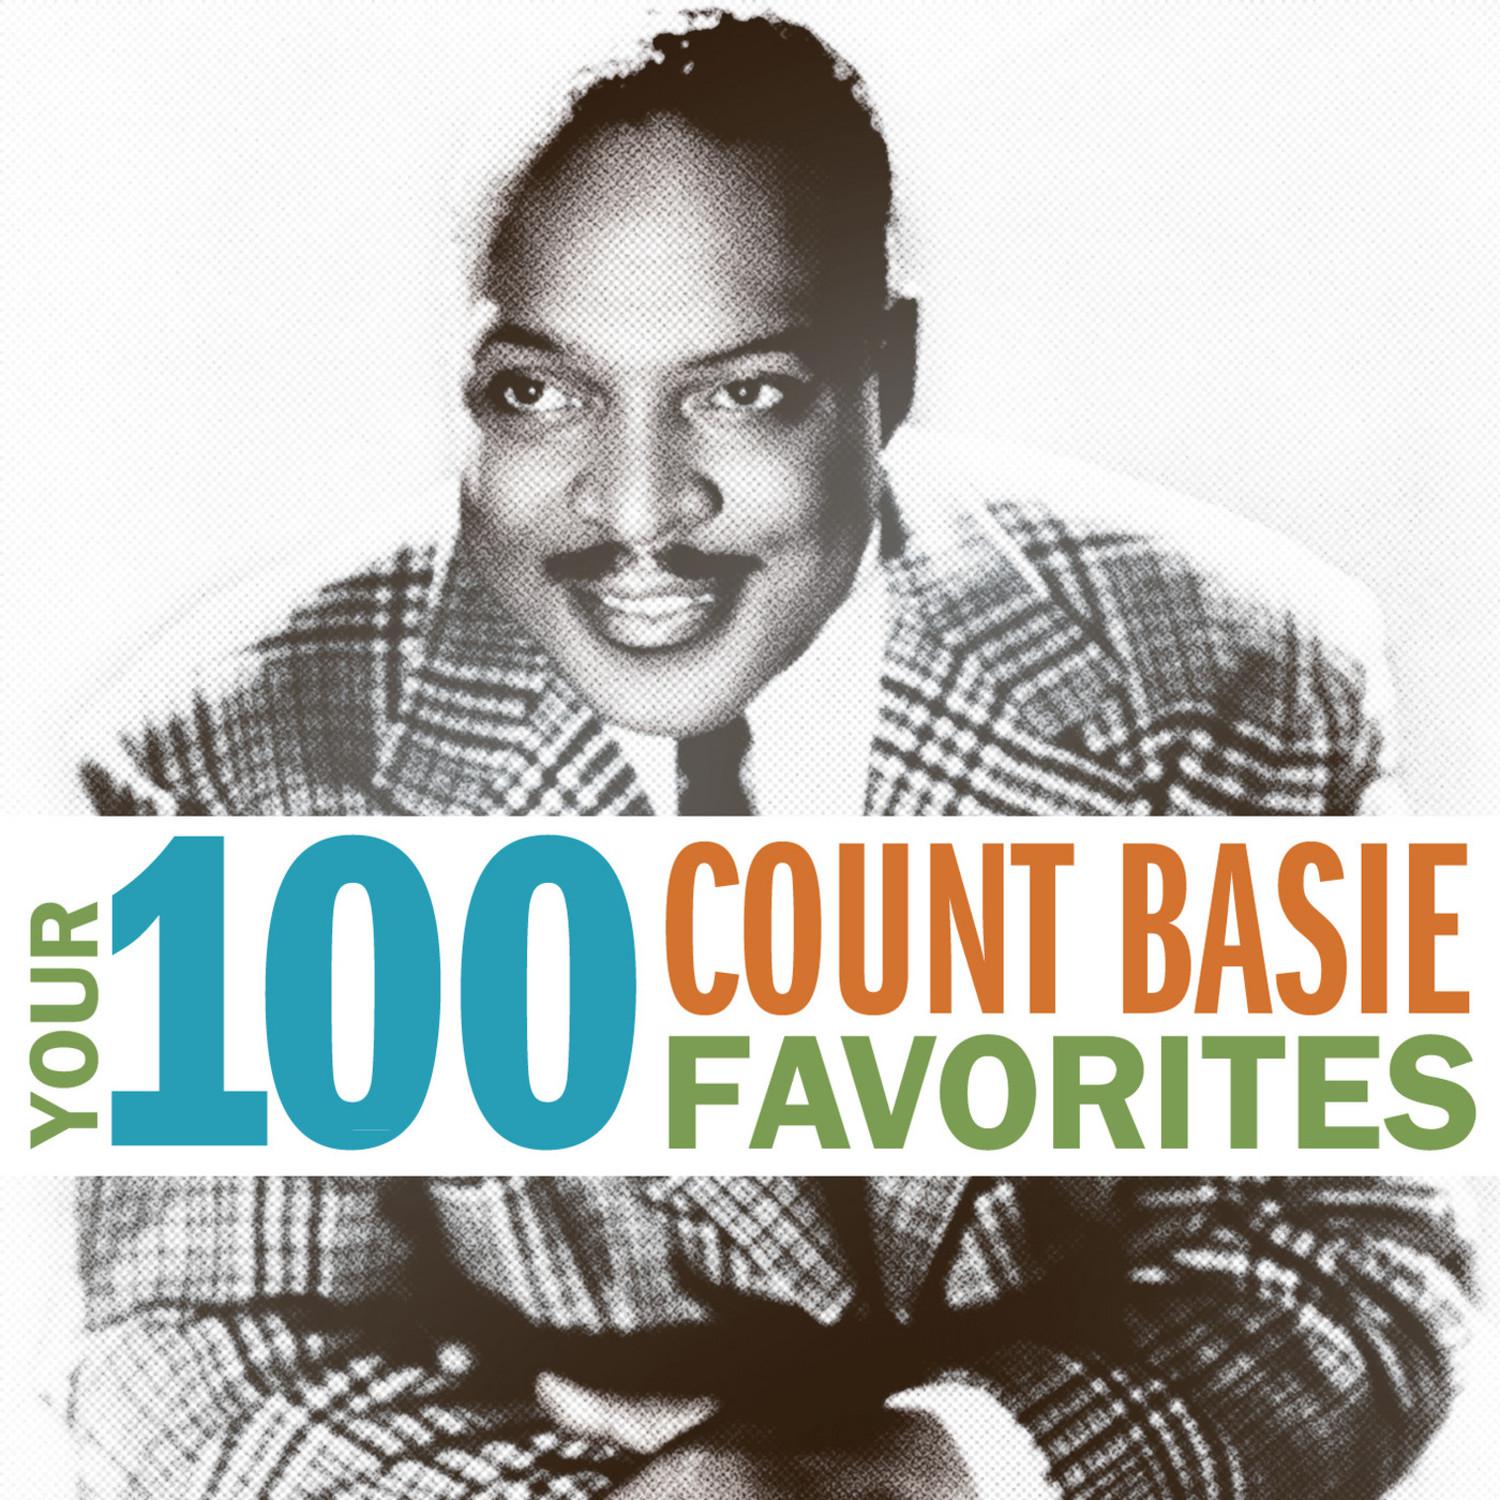 Your 100 Count Basie Favorites